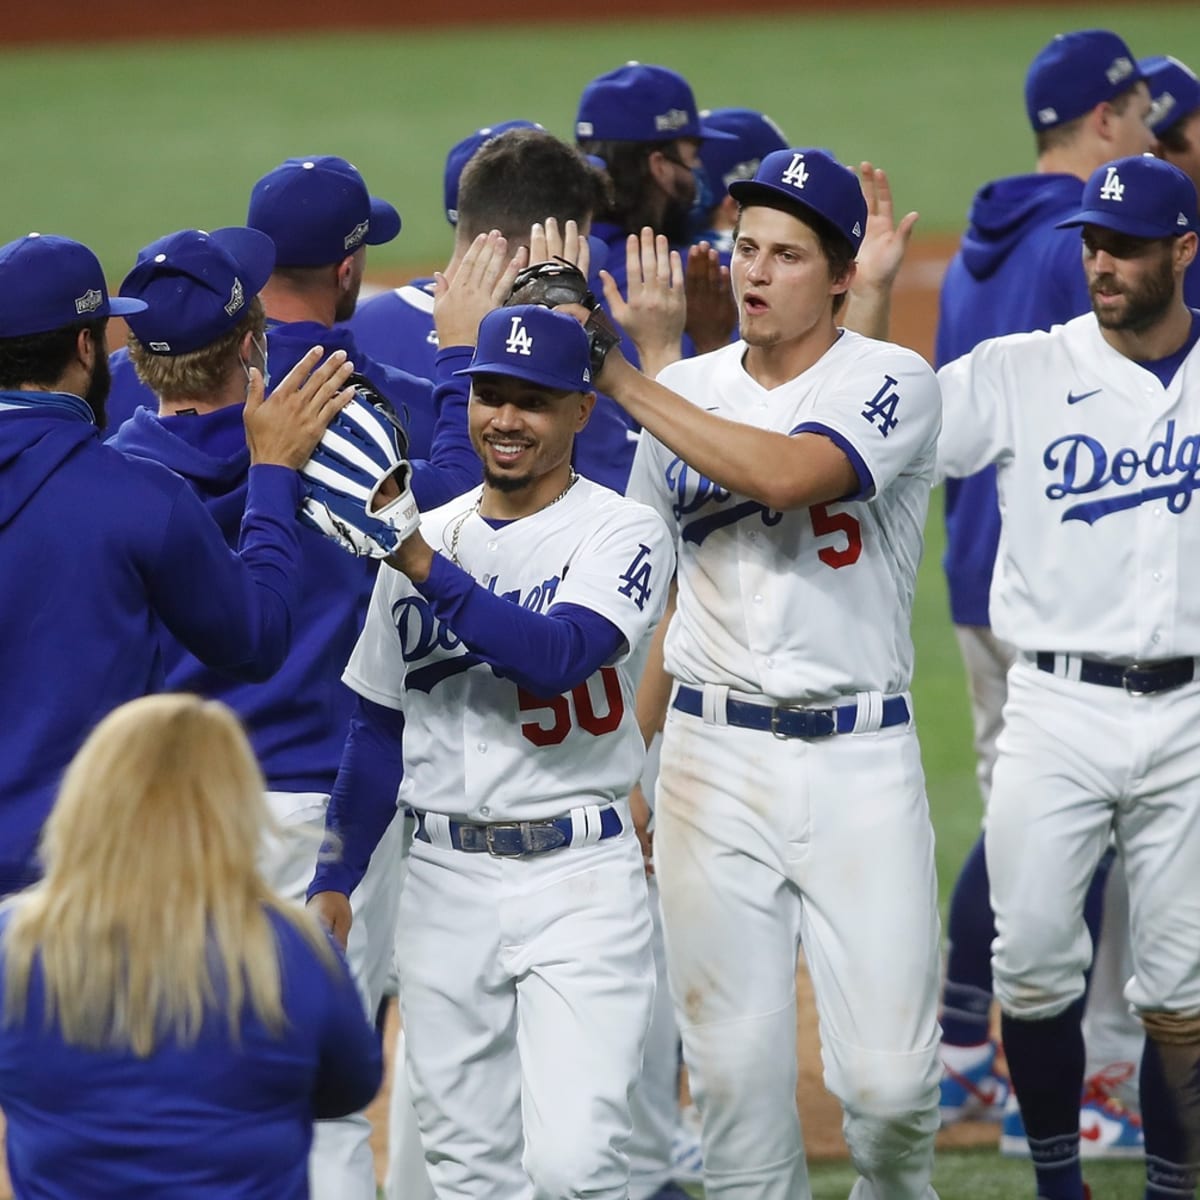 Dodgers vs. Padres schedule, TV, game times, starting pitchers